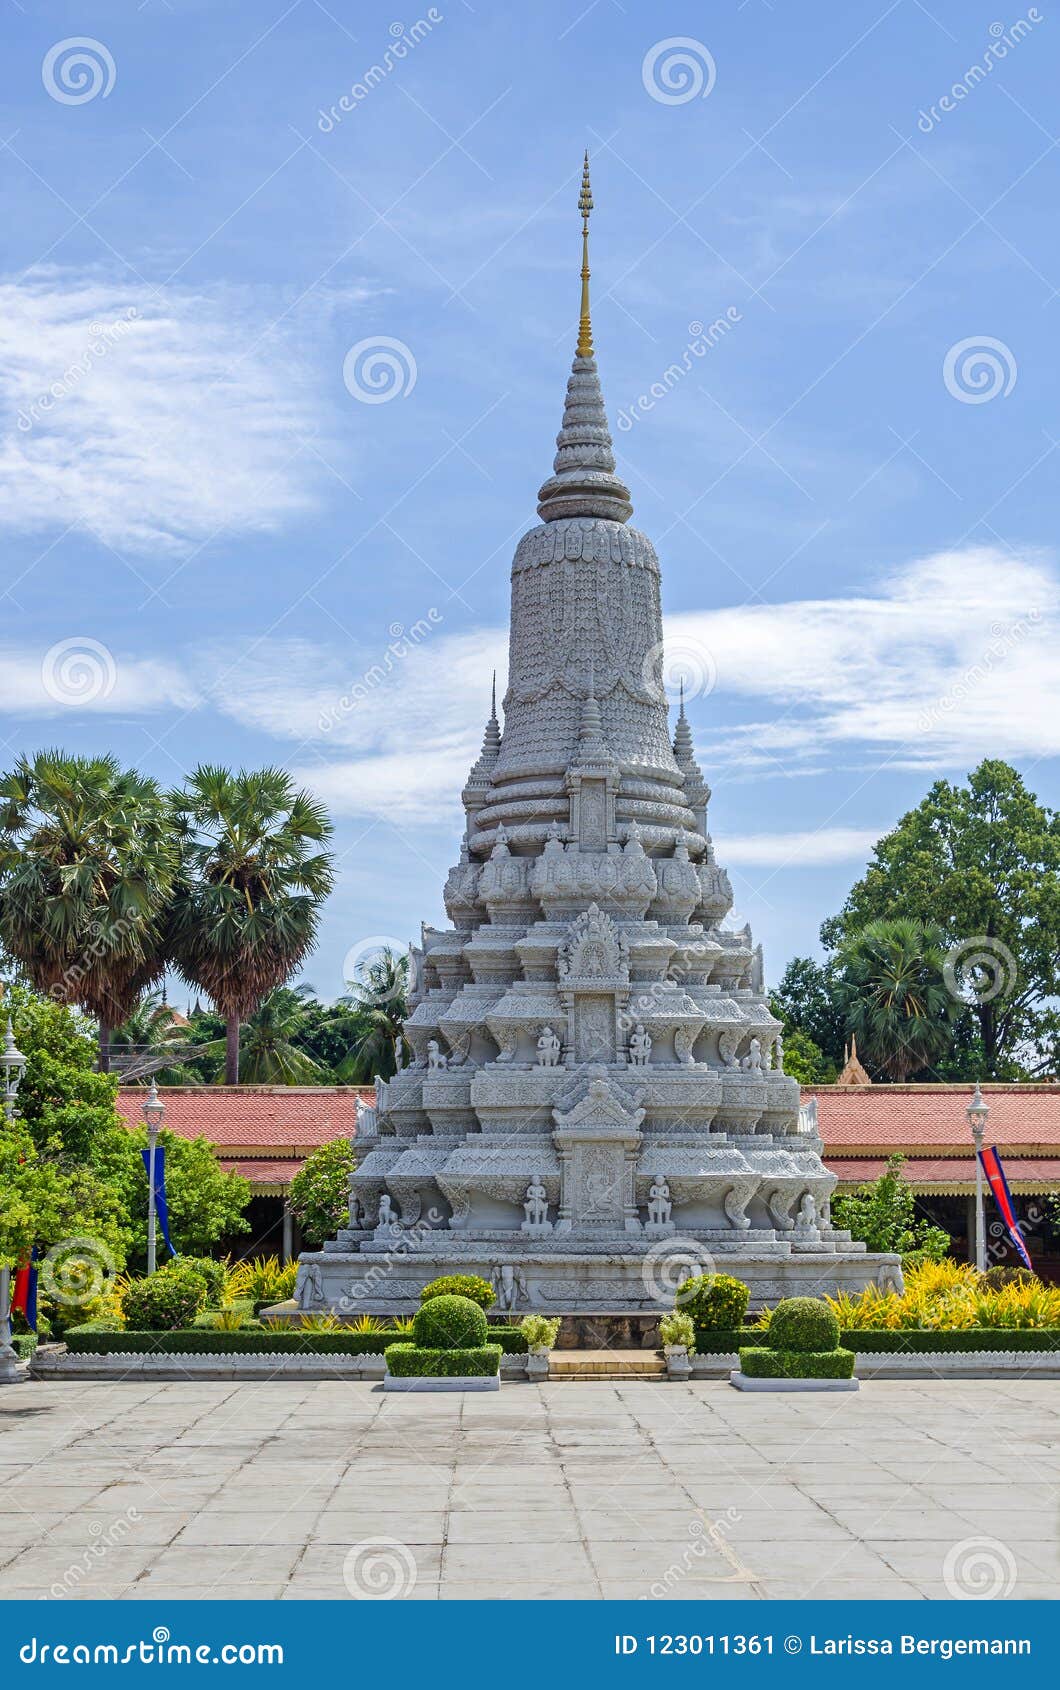 stupa of hm king norodom inside the royal palace in phnom penh,